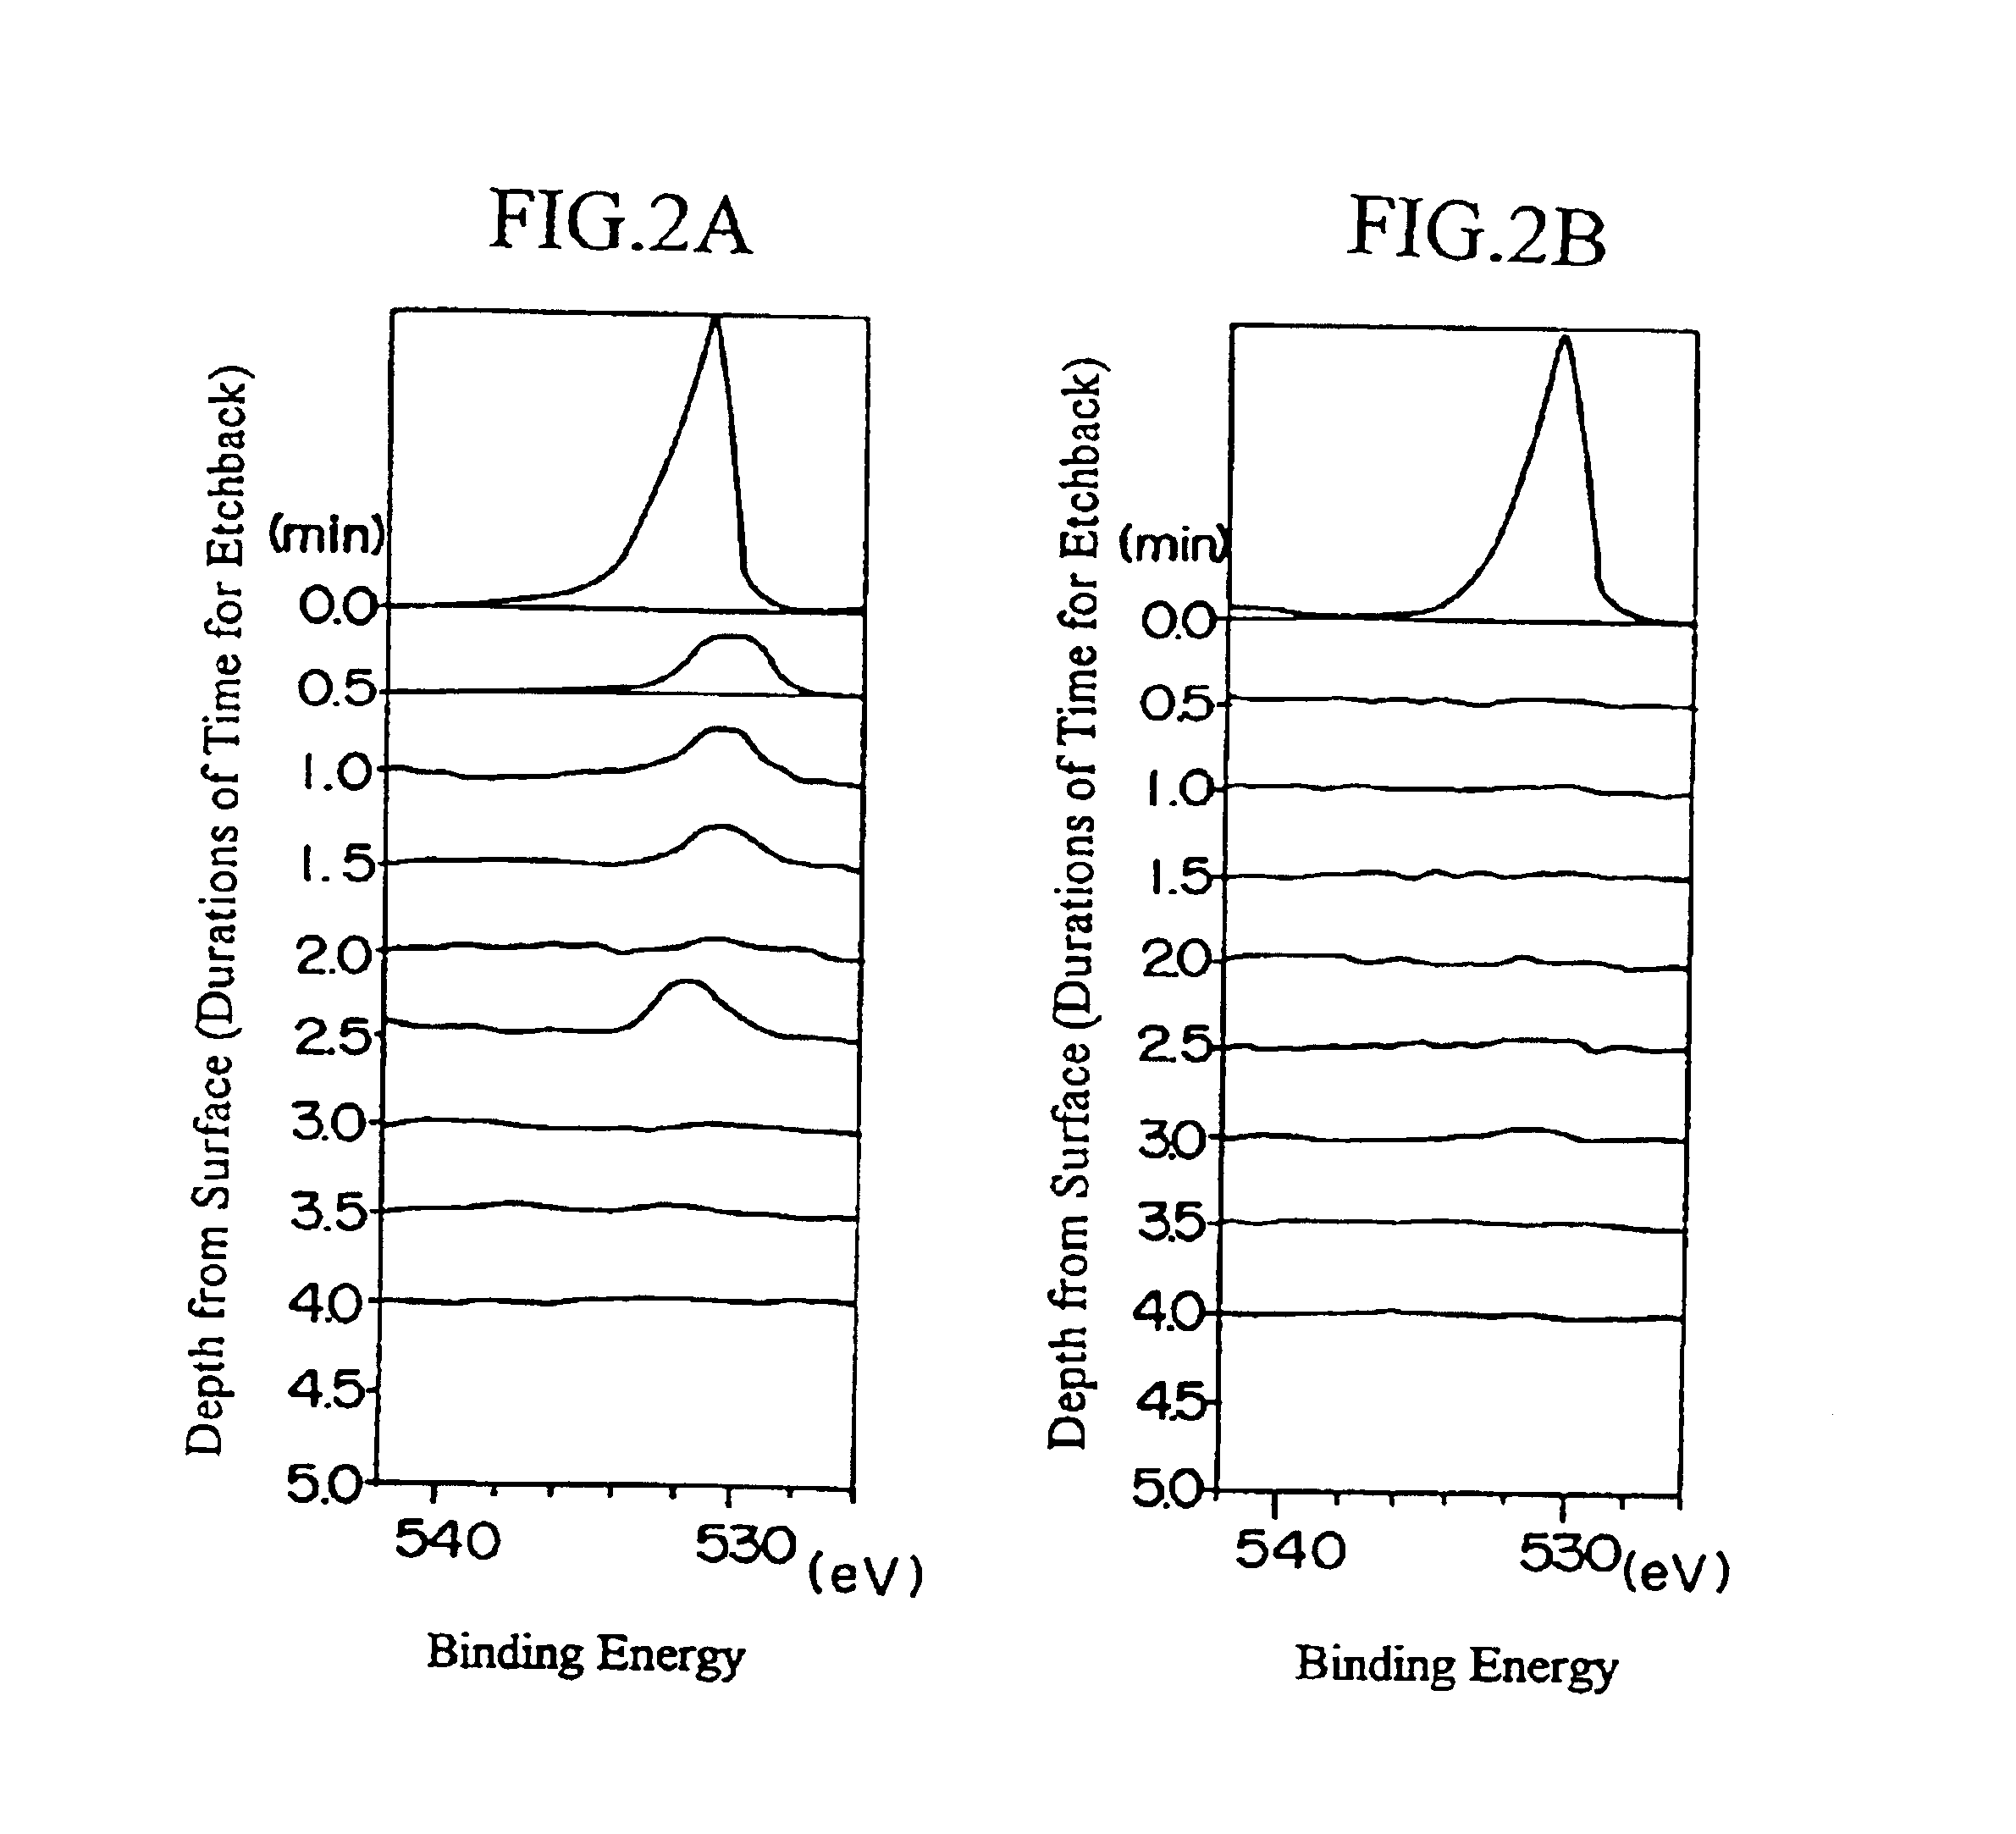 Embedded electroconductive layer structure